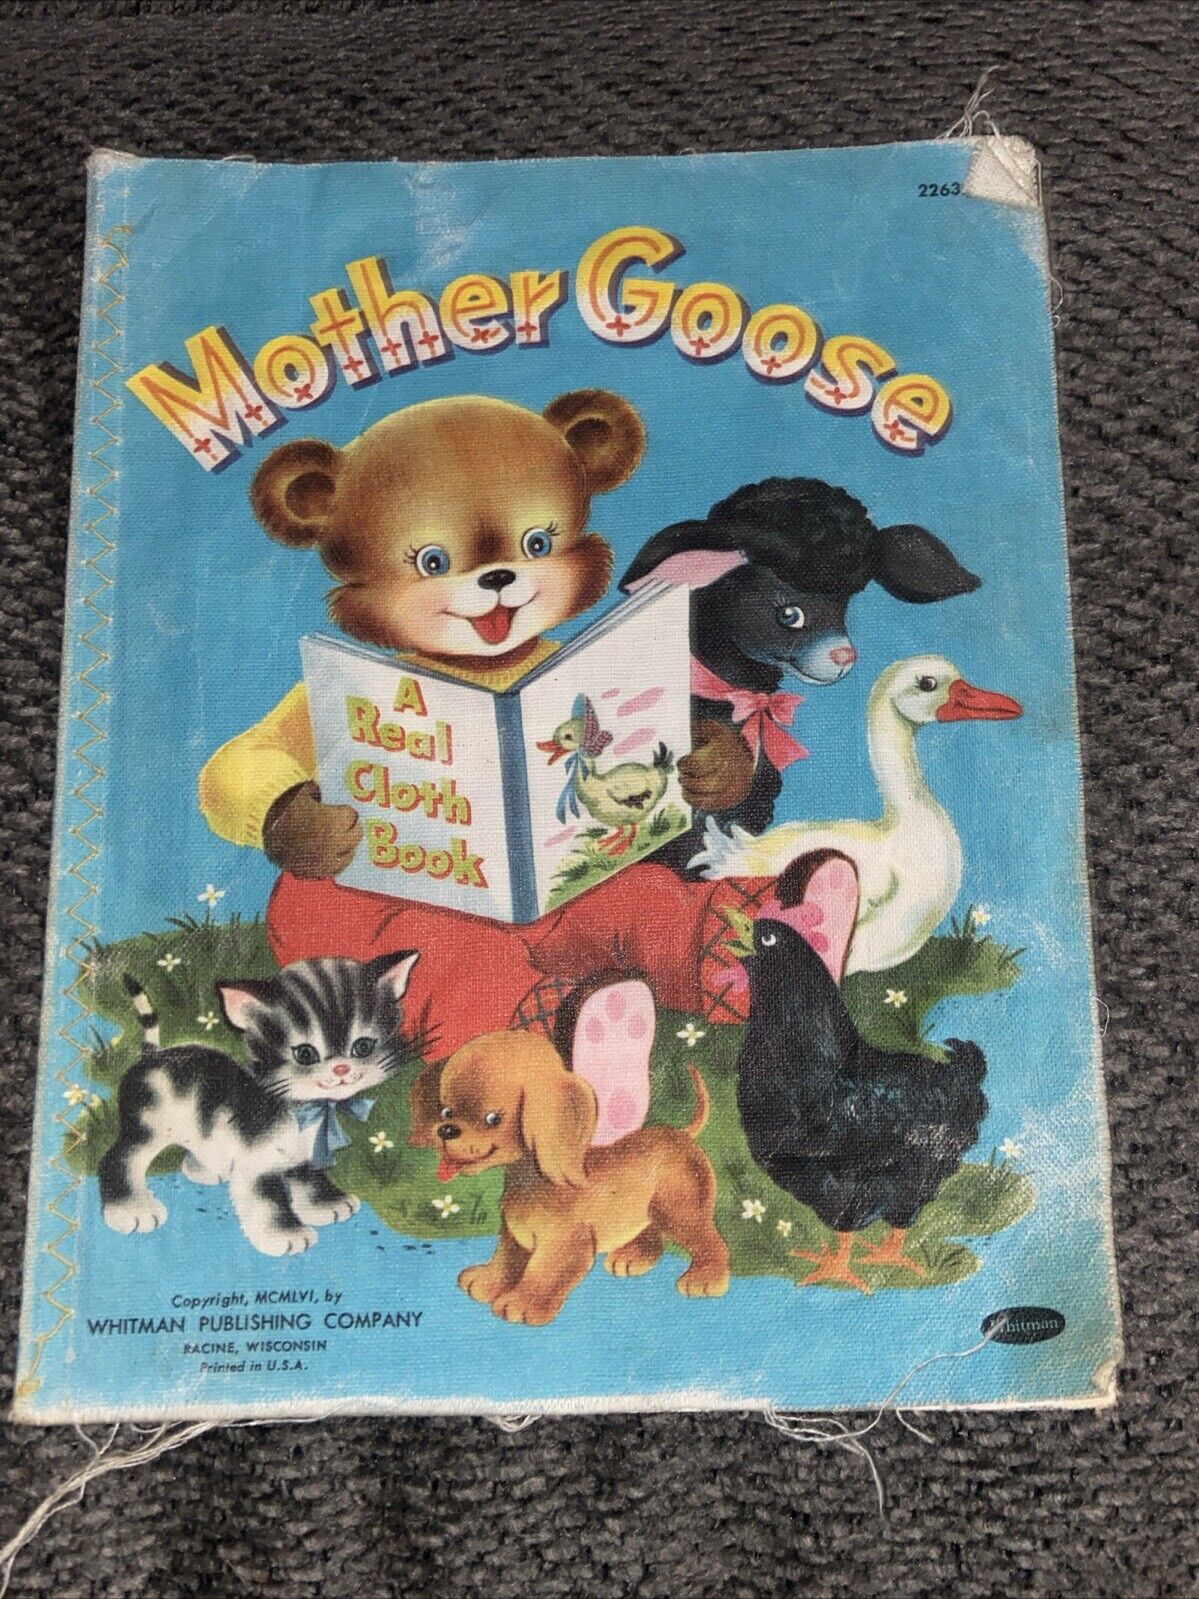 Vintage MOTHER GOOSE a real cloth book WHITMAN 1956